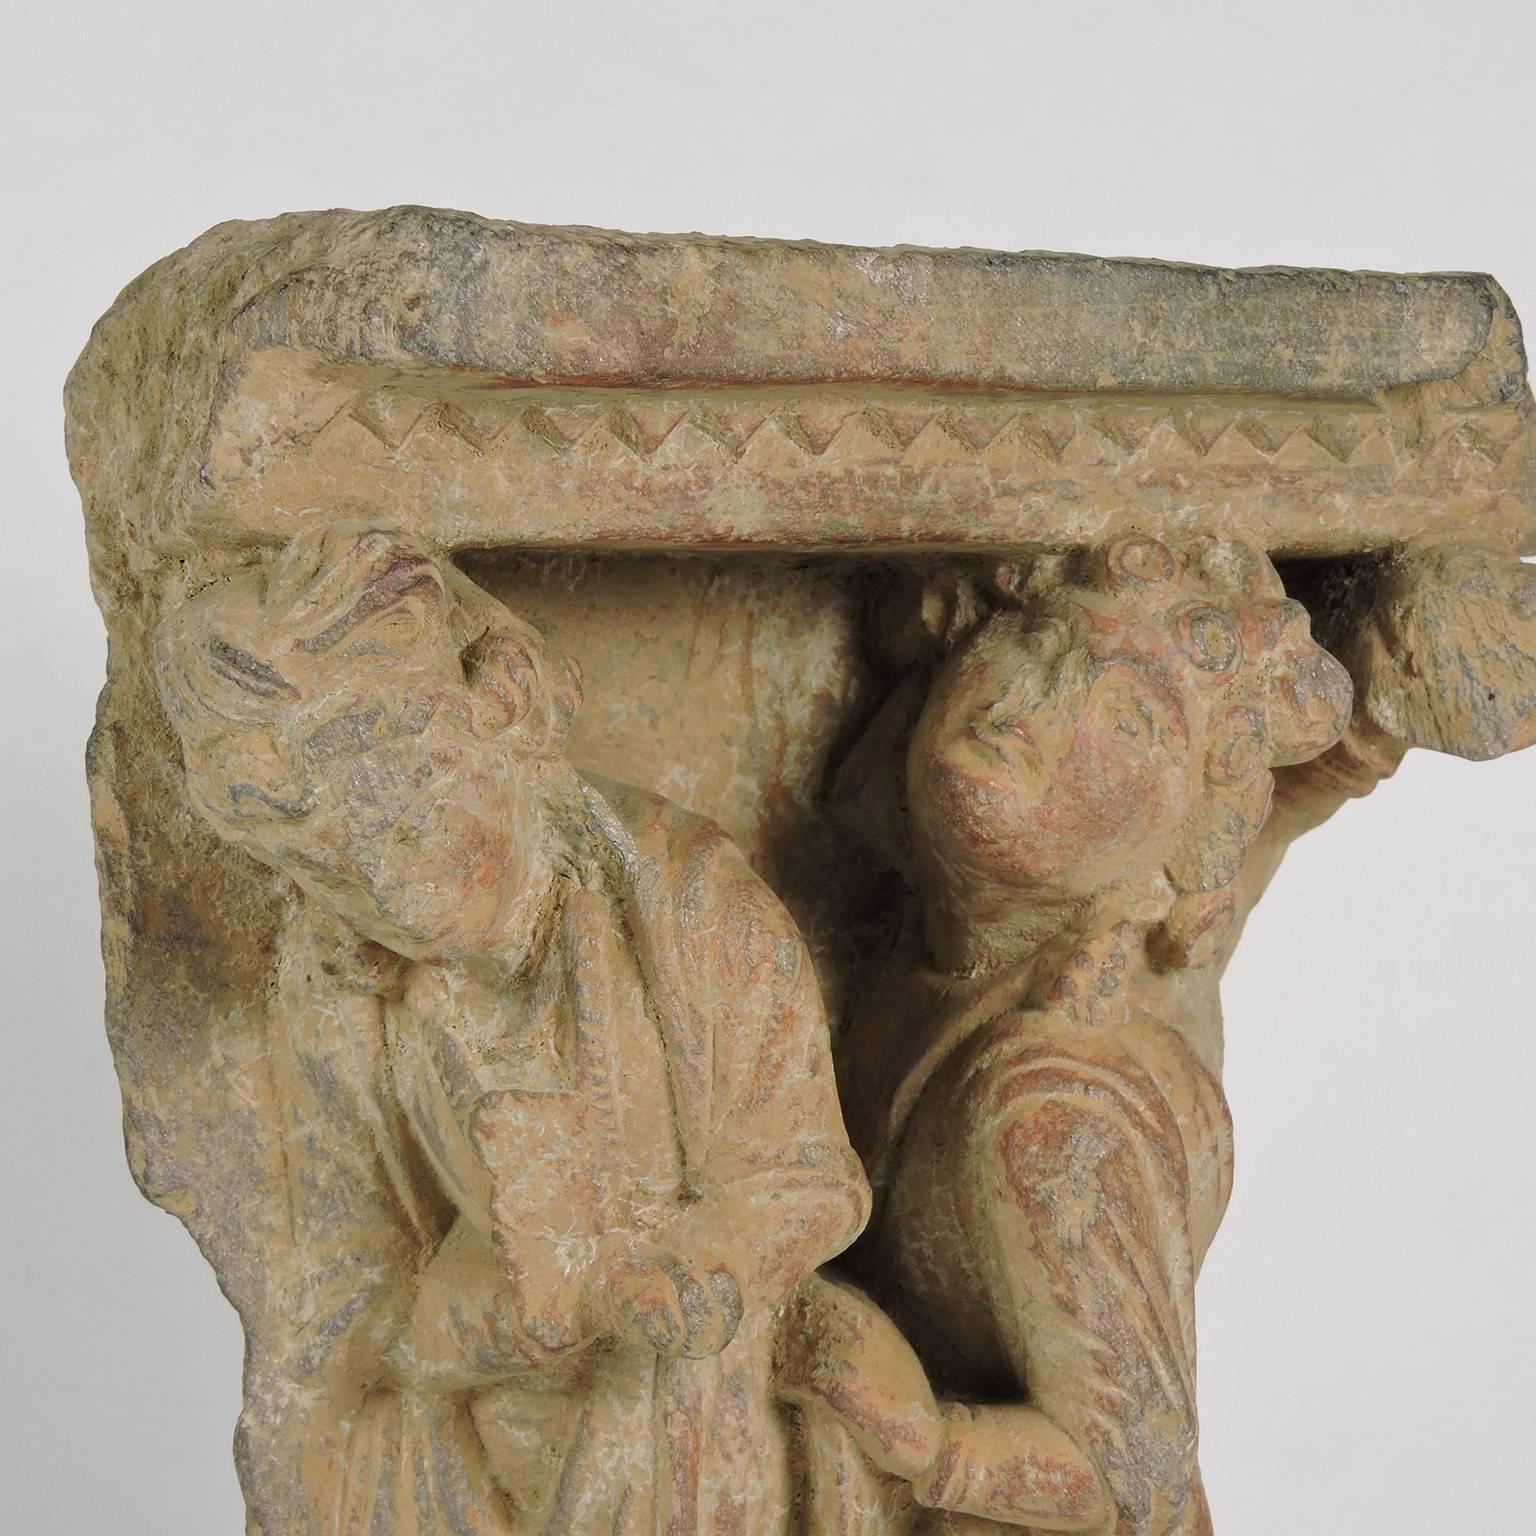 Gandharan carved stone architectural bracket, approx.200 AD; depicting two figures in robes, mounted on a wood base. Provenance of the Estate of T Bryant, former US State Department 1960s.
Dimensions: 7 3/4 x 7 x 2 1/2 in. Overall height with base: